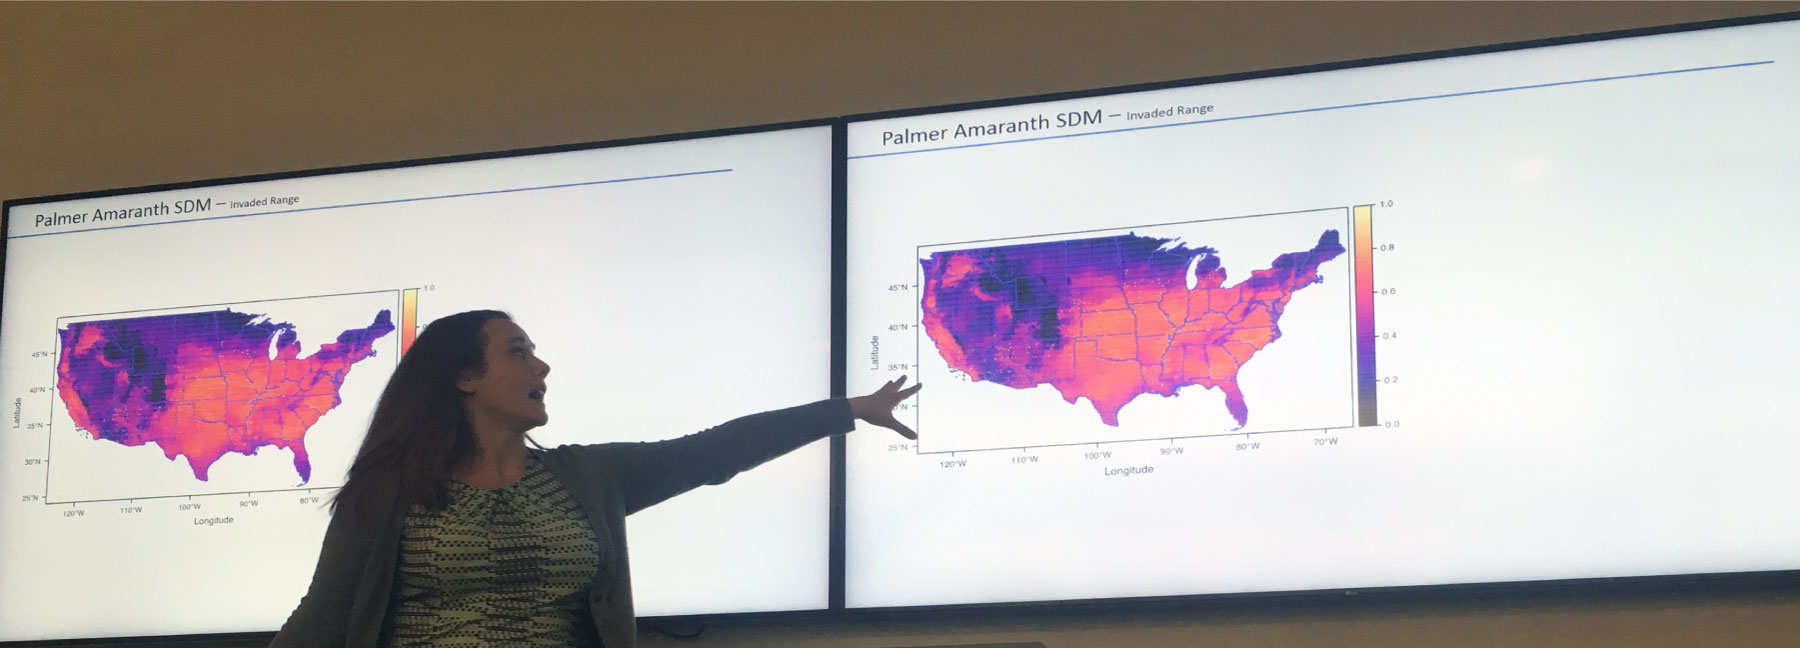 photograph of researcher in front of a wall projection of a Palmer amaranth range map of the United States